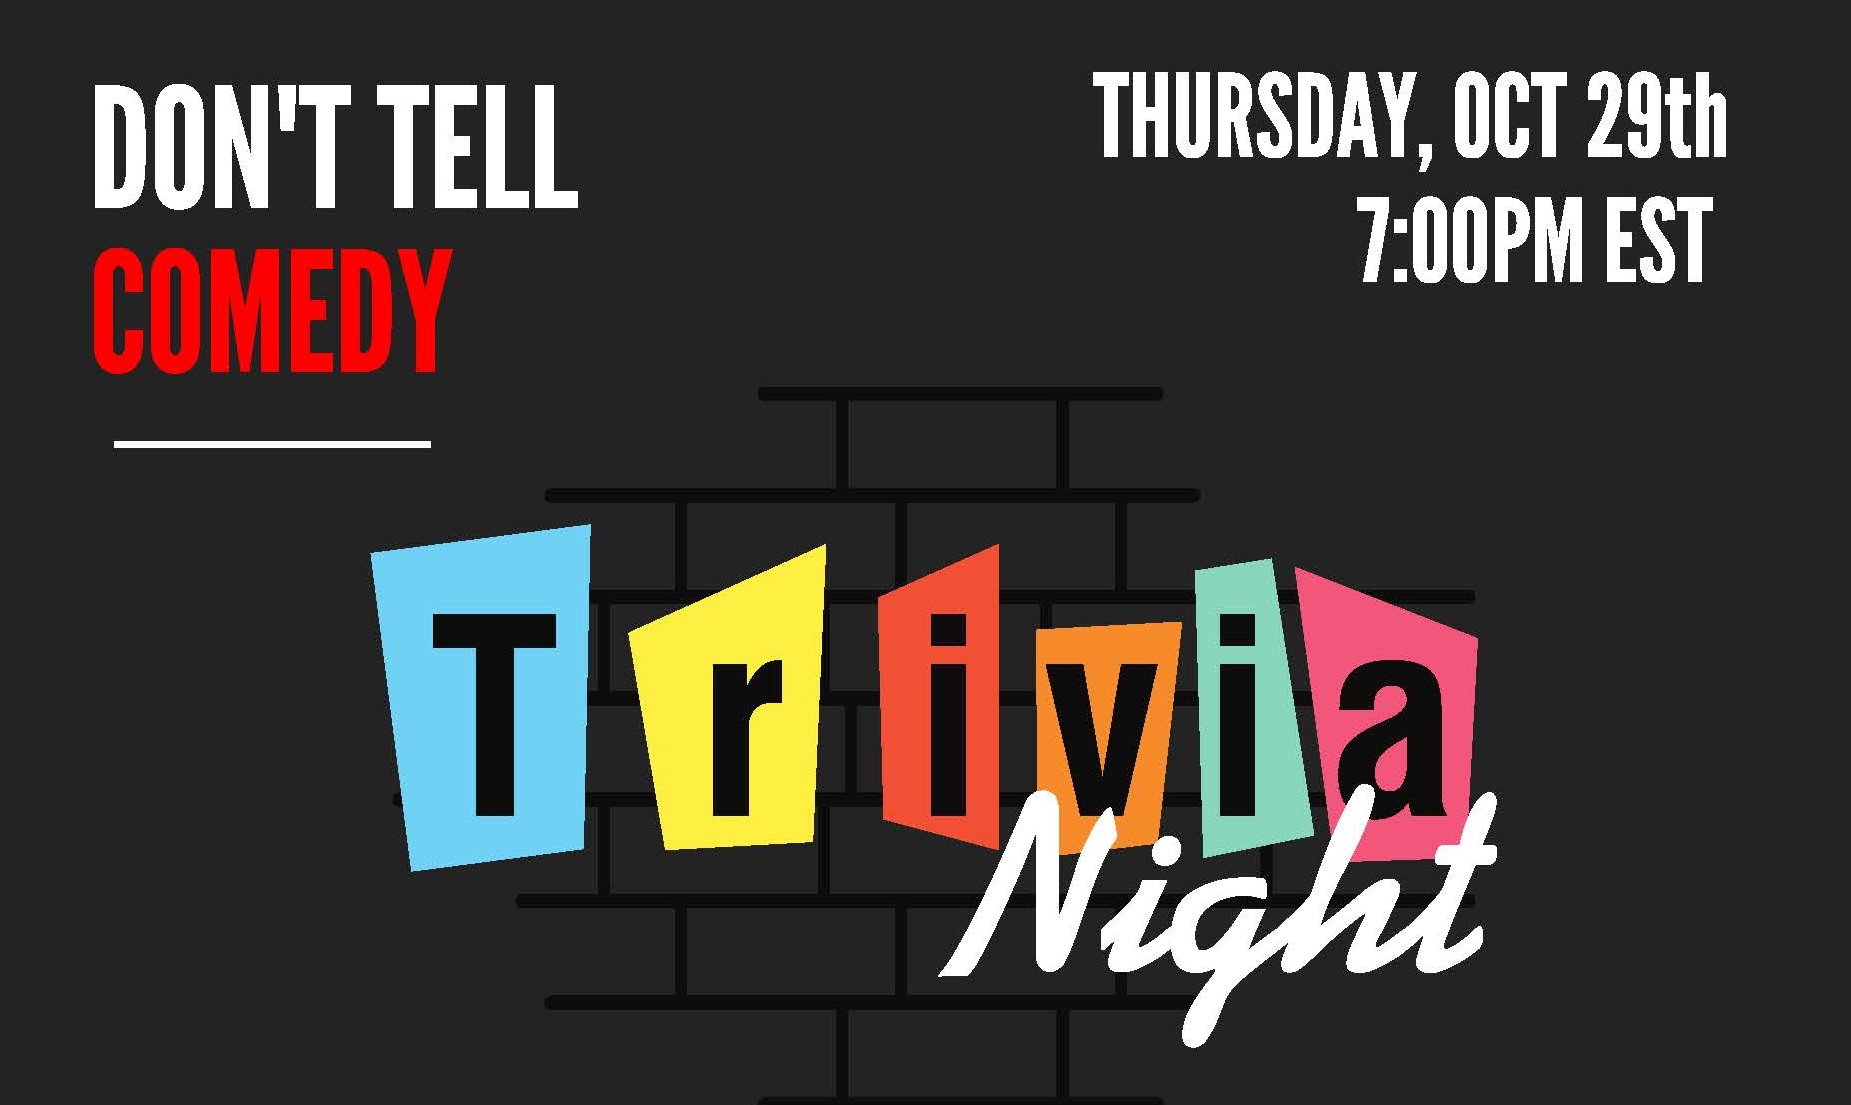 Text graphic which reads: Don't Tell Comedy Trivia Night, Thursday, October 29th at 7:00pm EST.